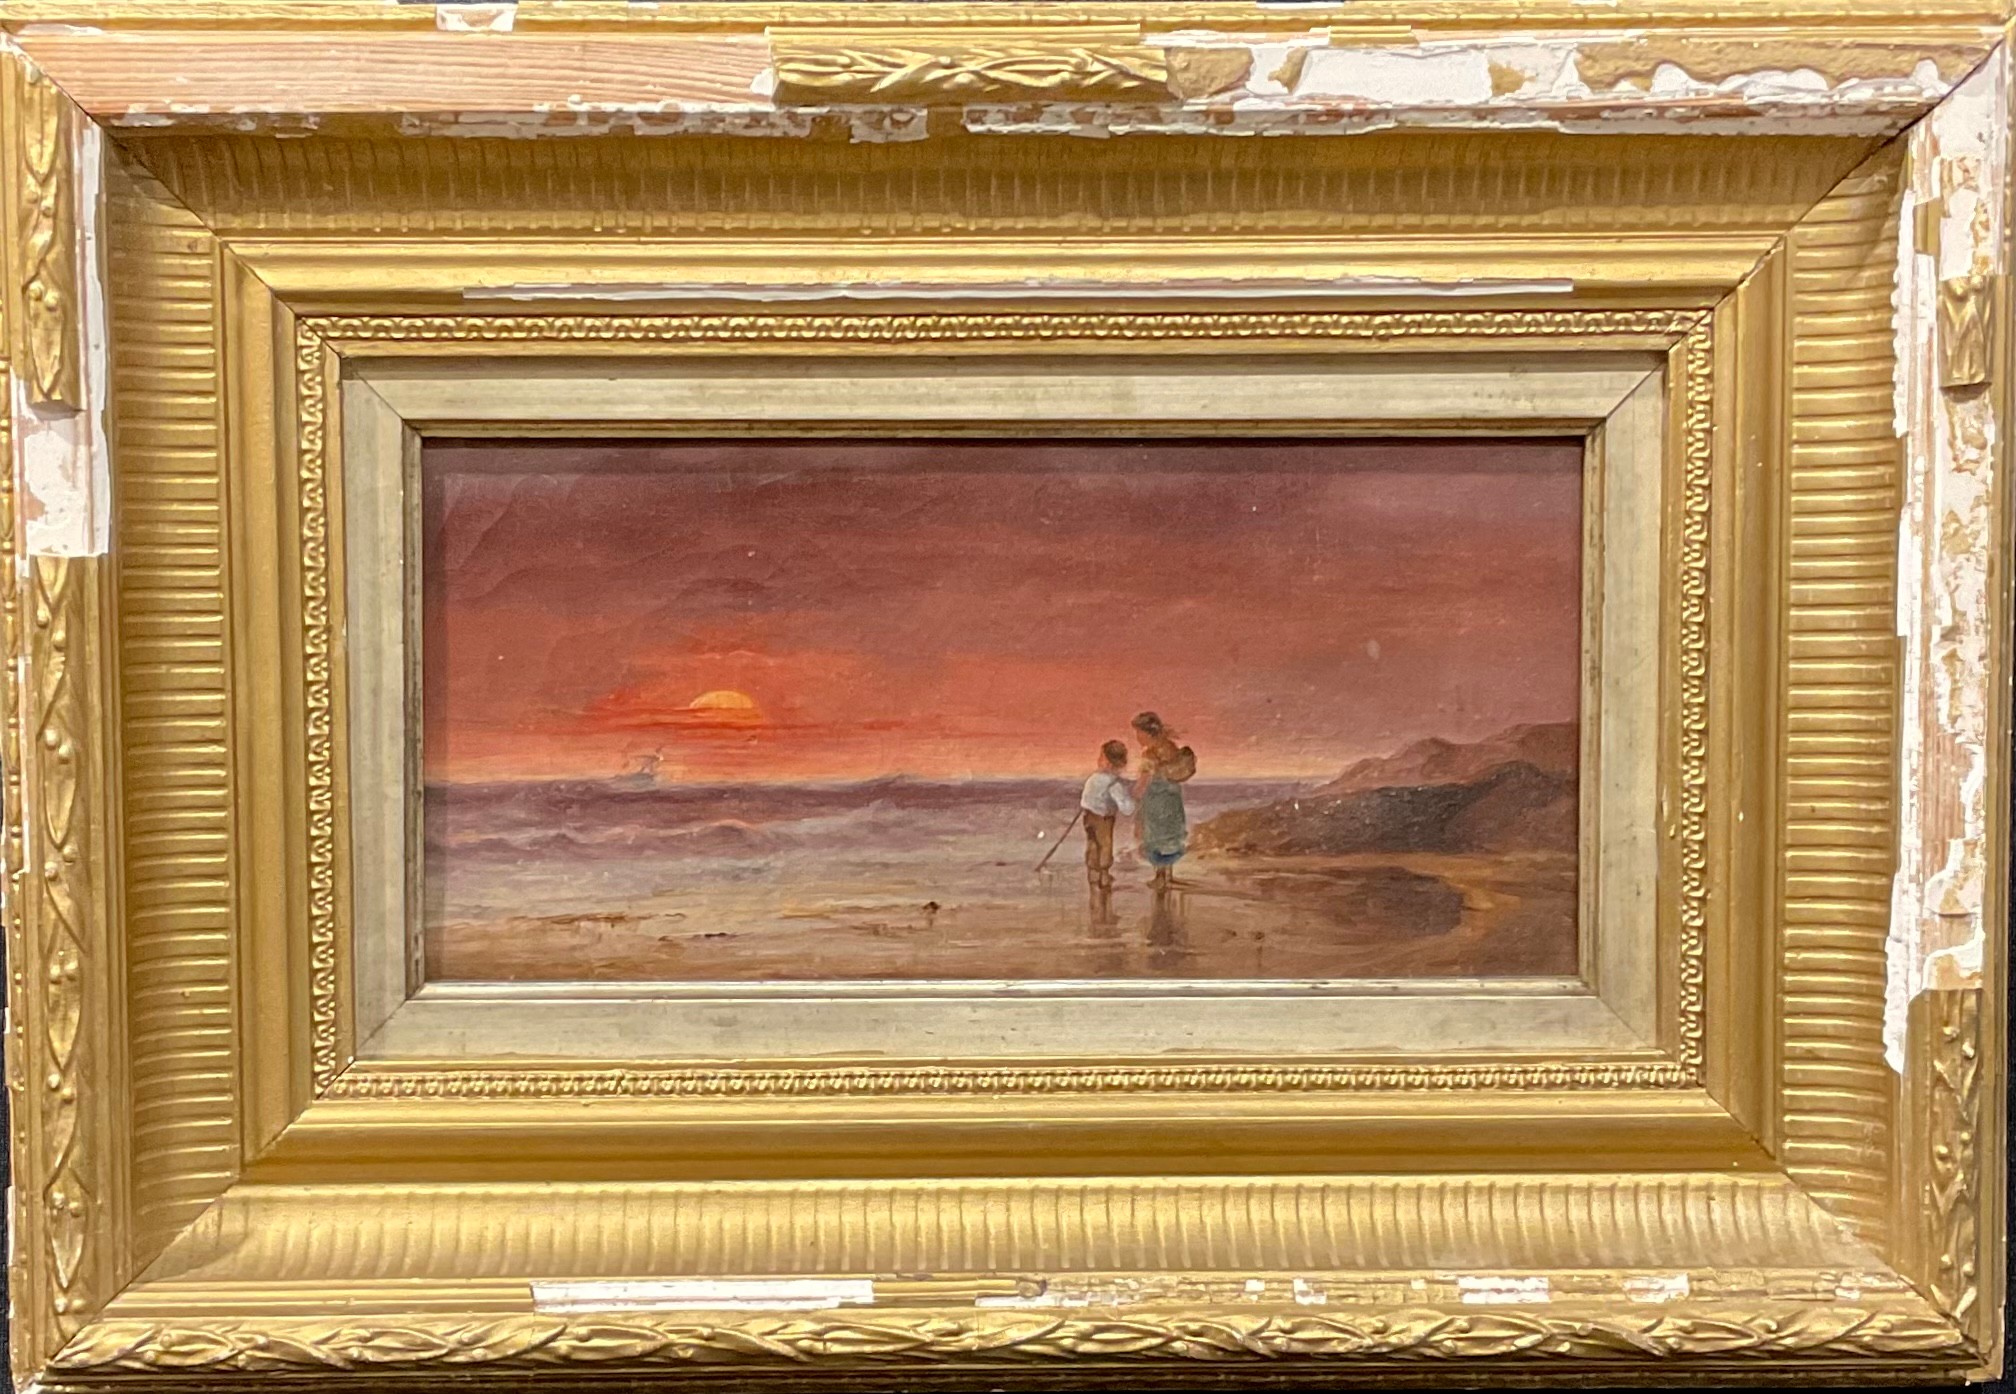 English School (19th century) Watching the Sunset oil on canvas, 11cm x 24cm - Image 2 of 3